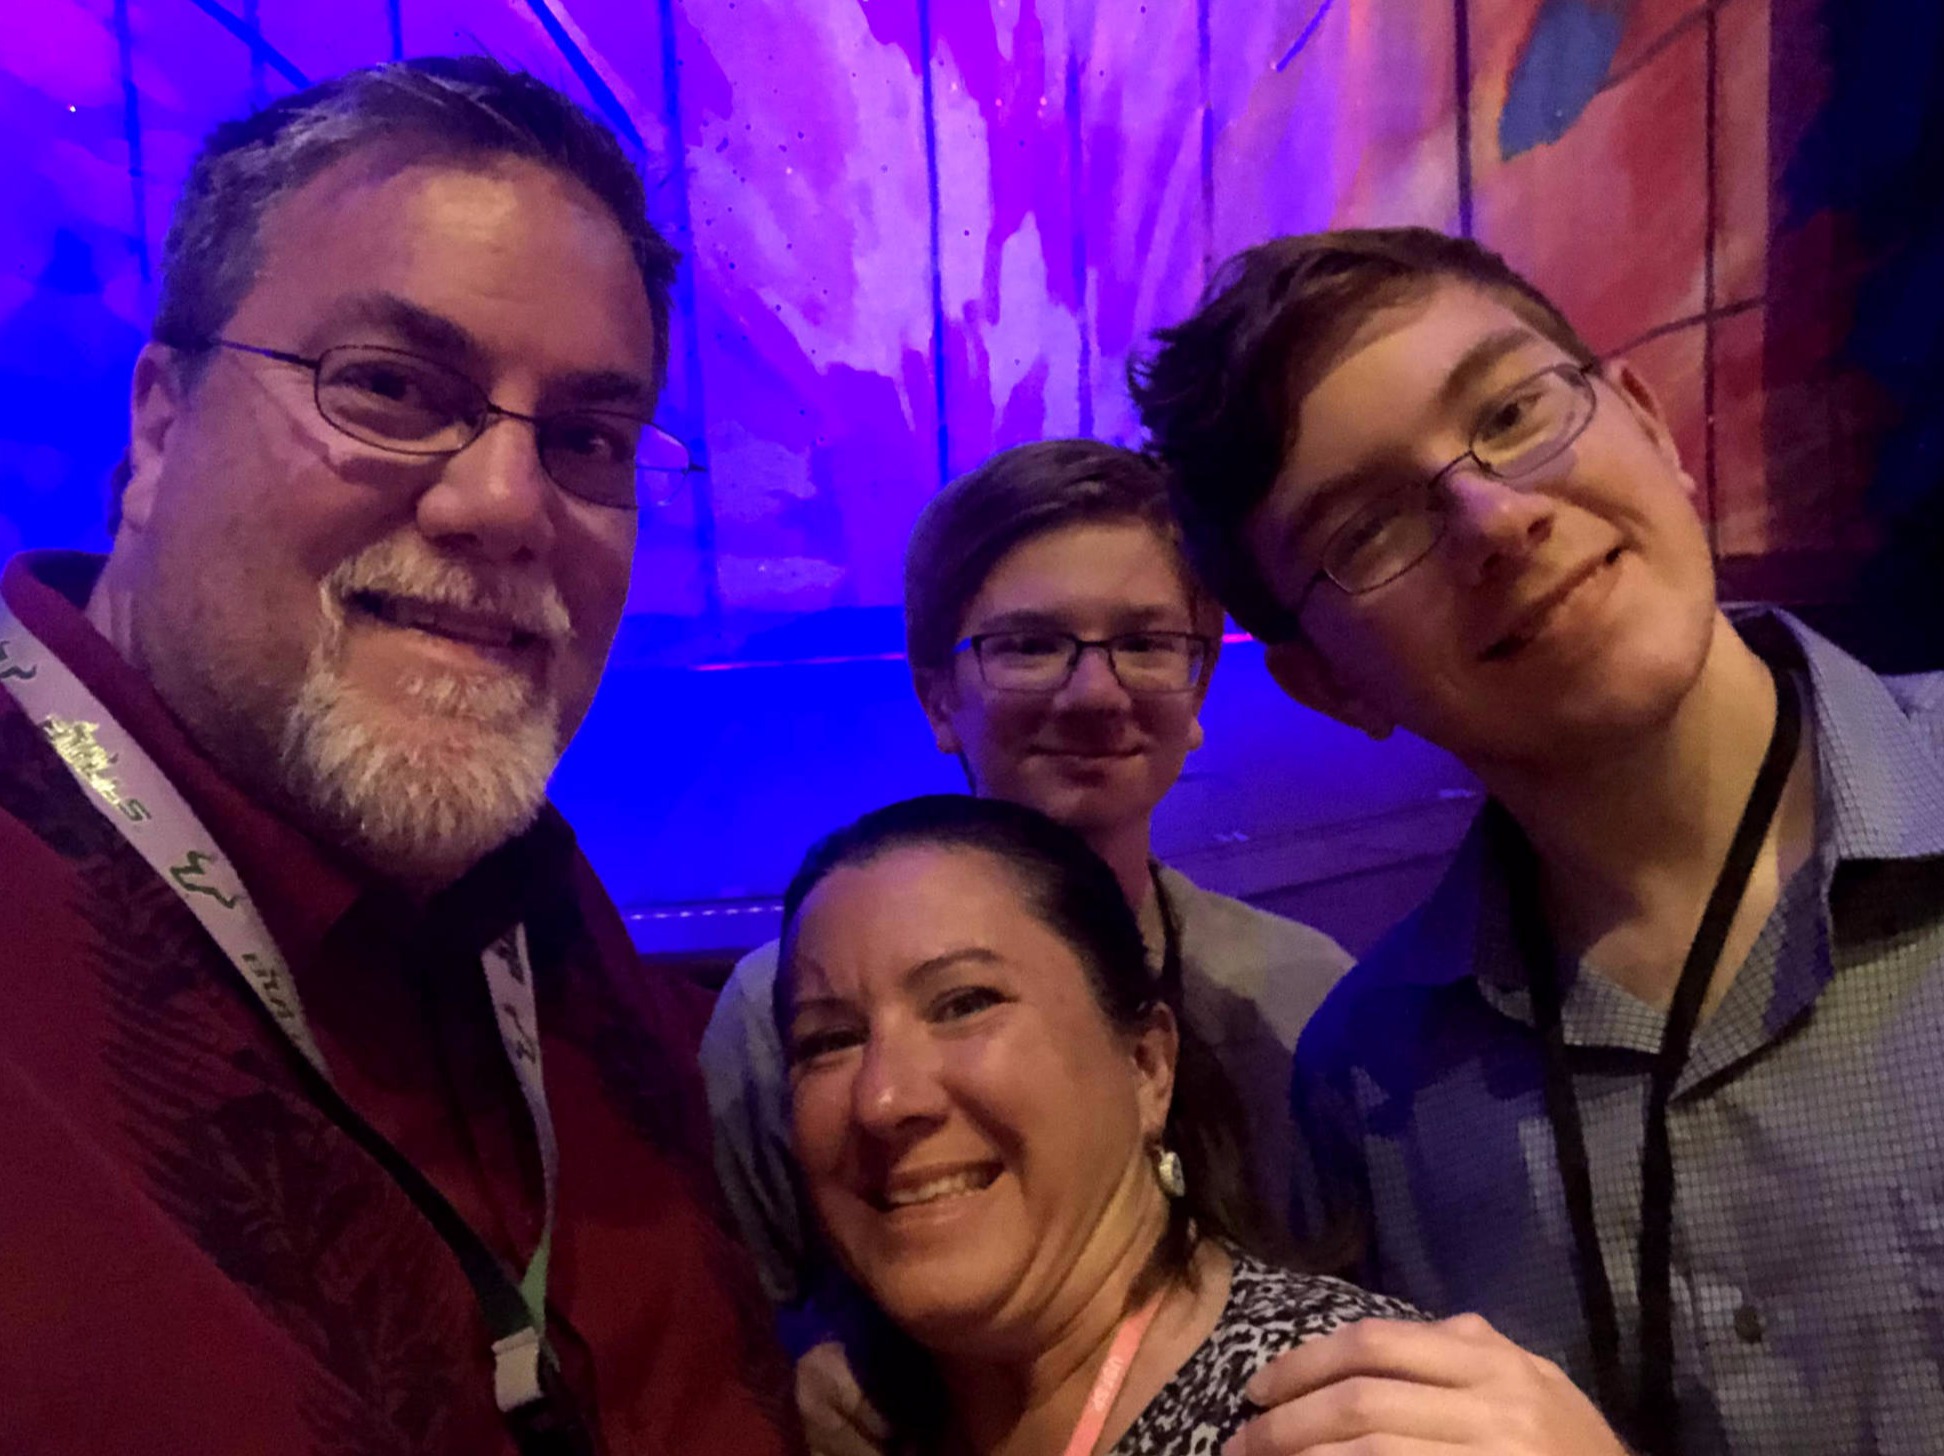 Photo of David Brodosi and his family taking in a show while traveling.